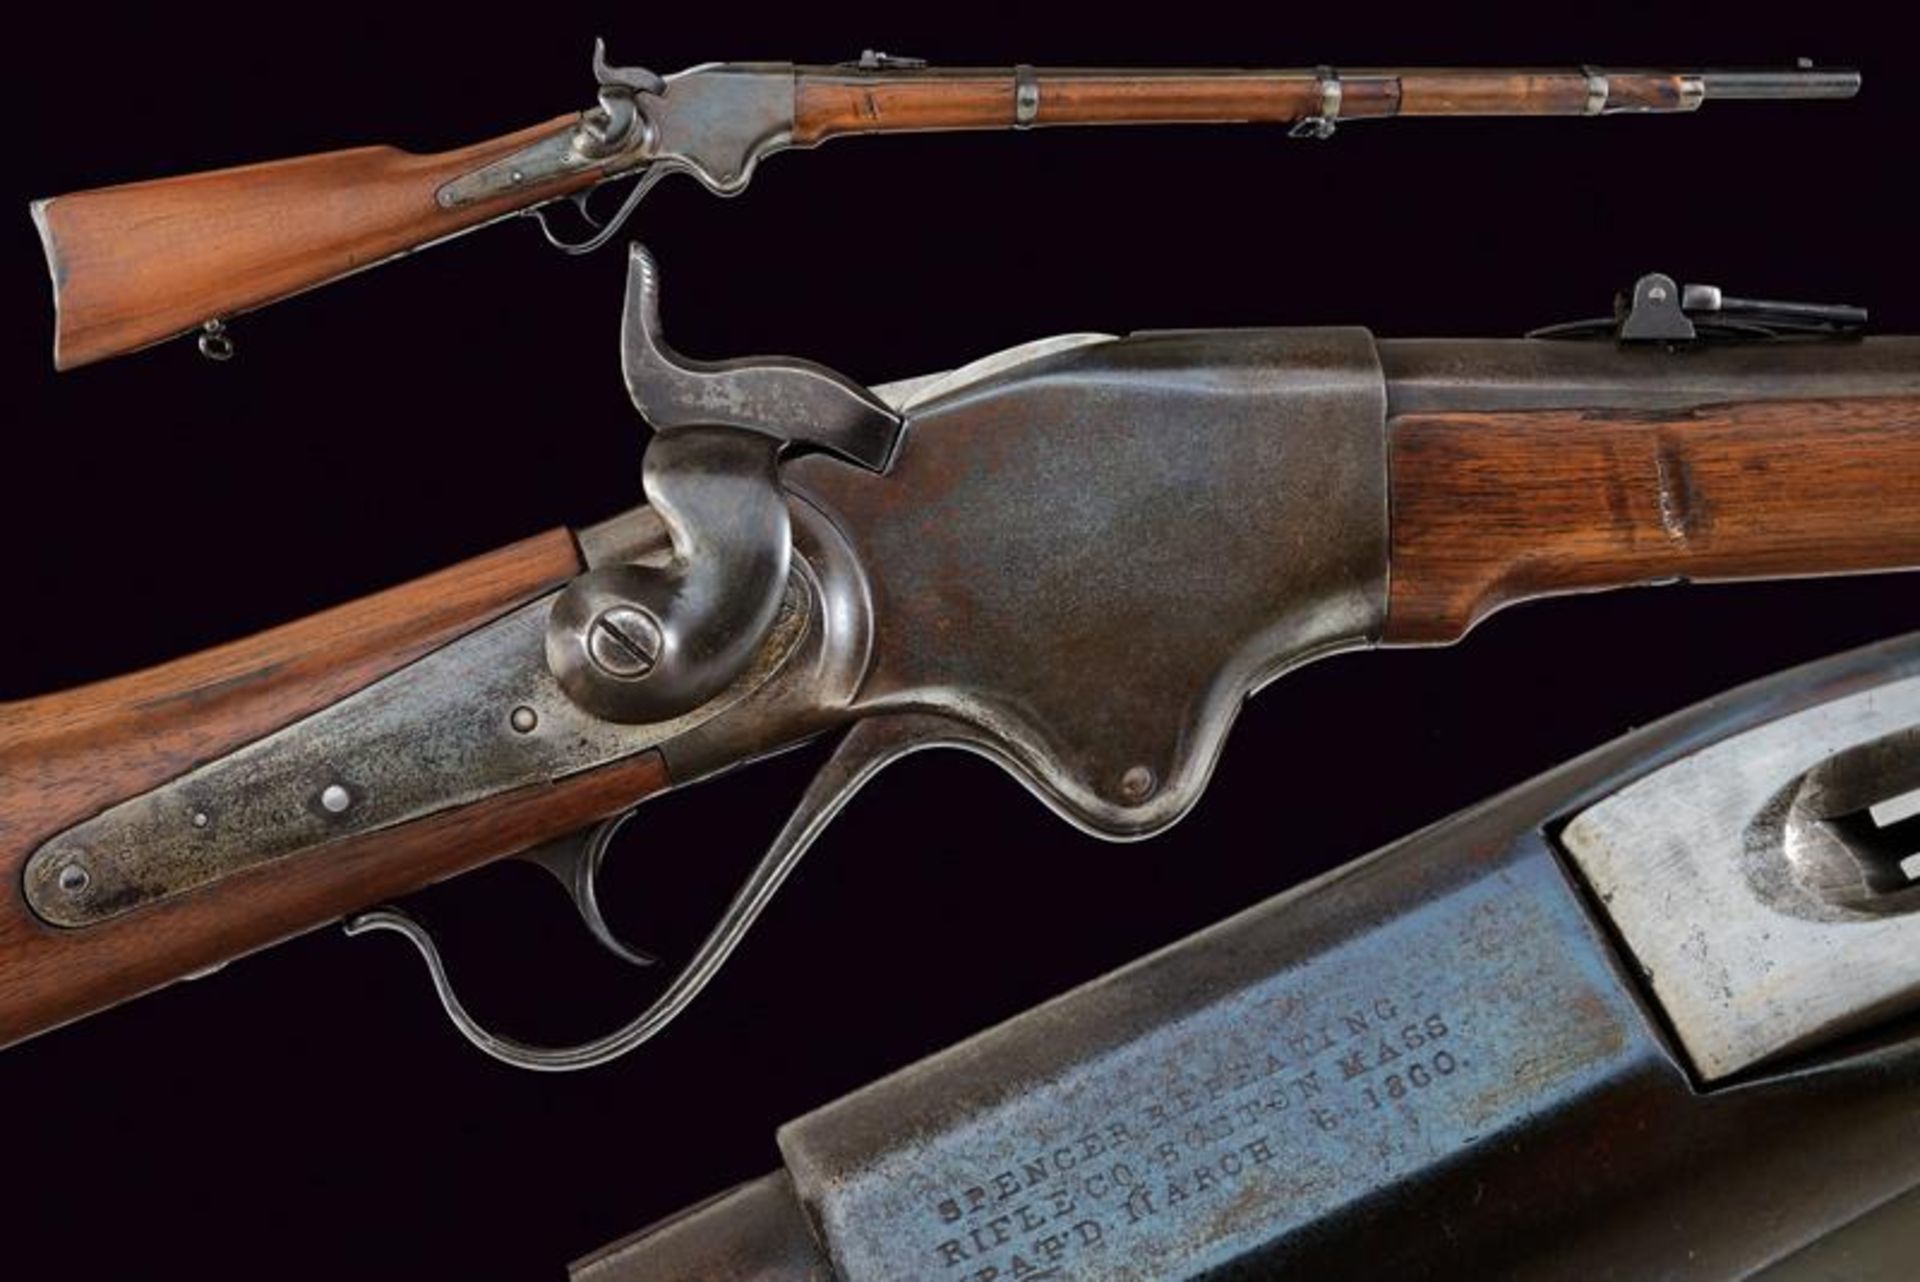 Spencer Repeating Rifle